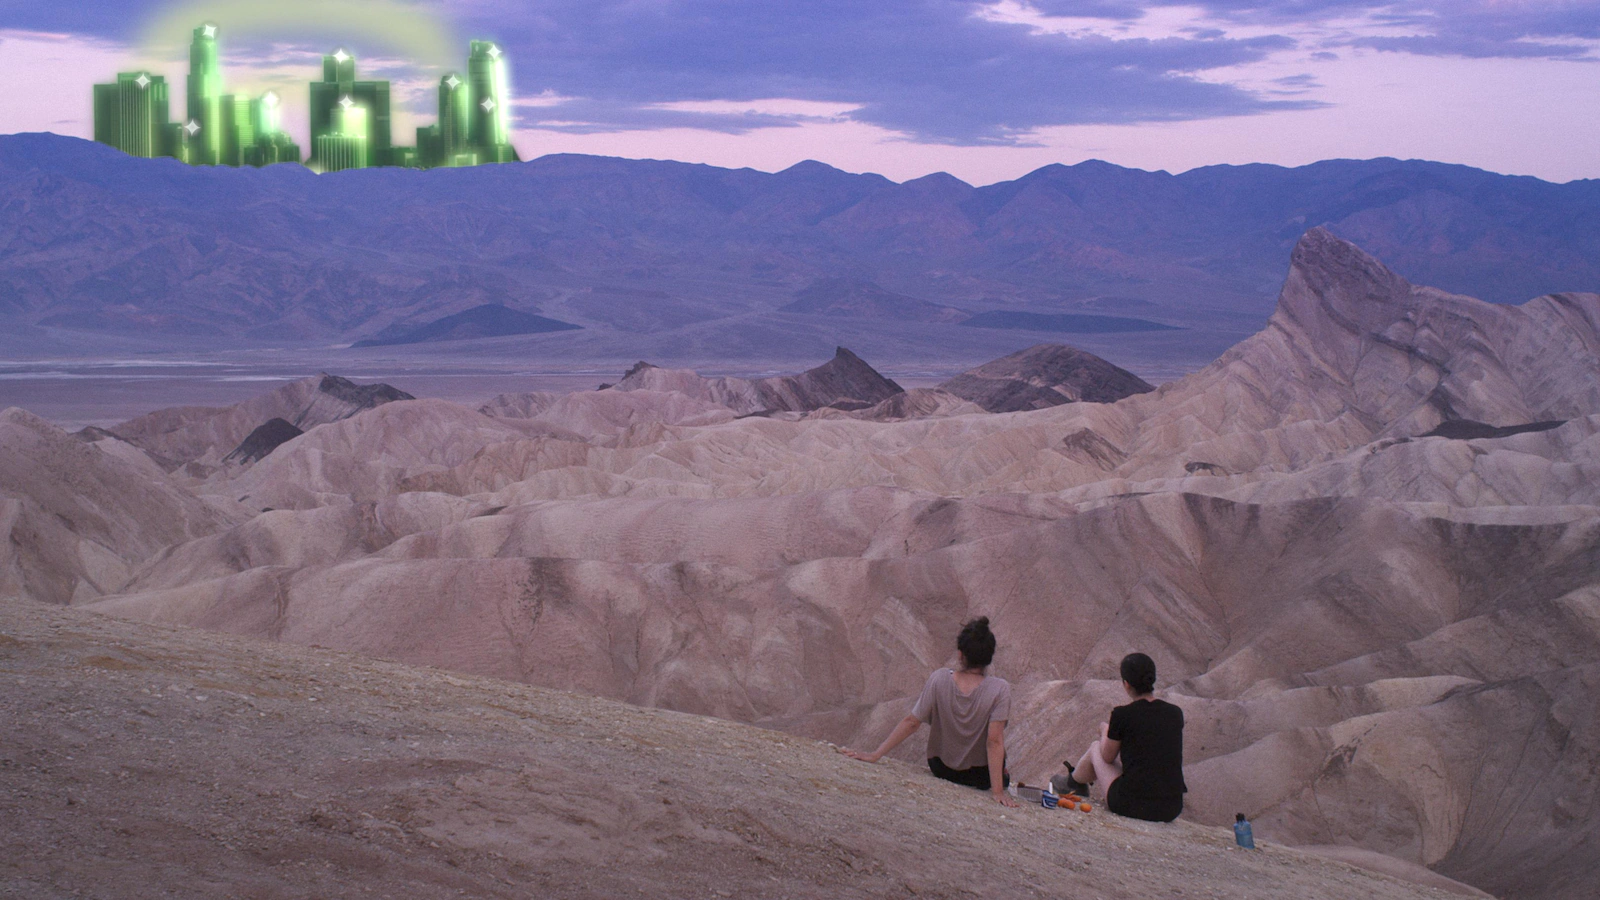 Two little girls sitting in the desert facing a green virtual city scene.